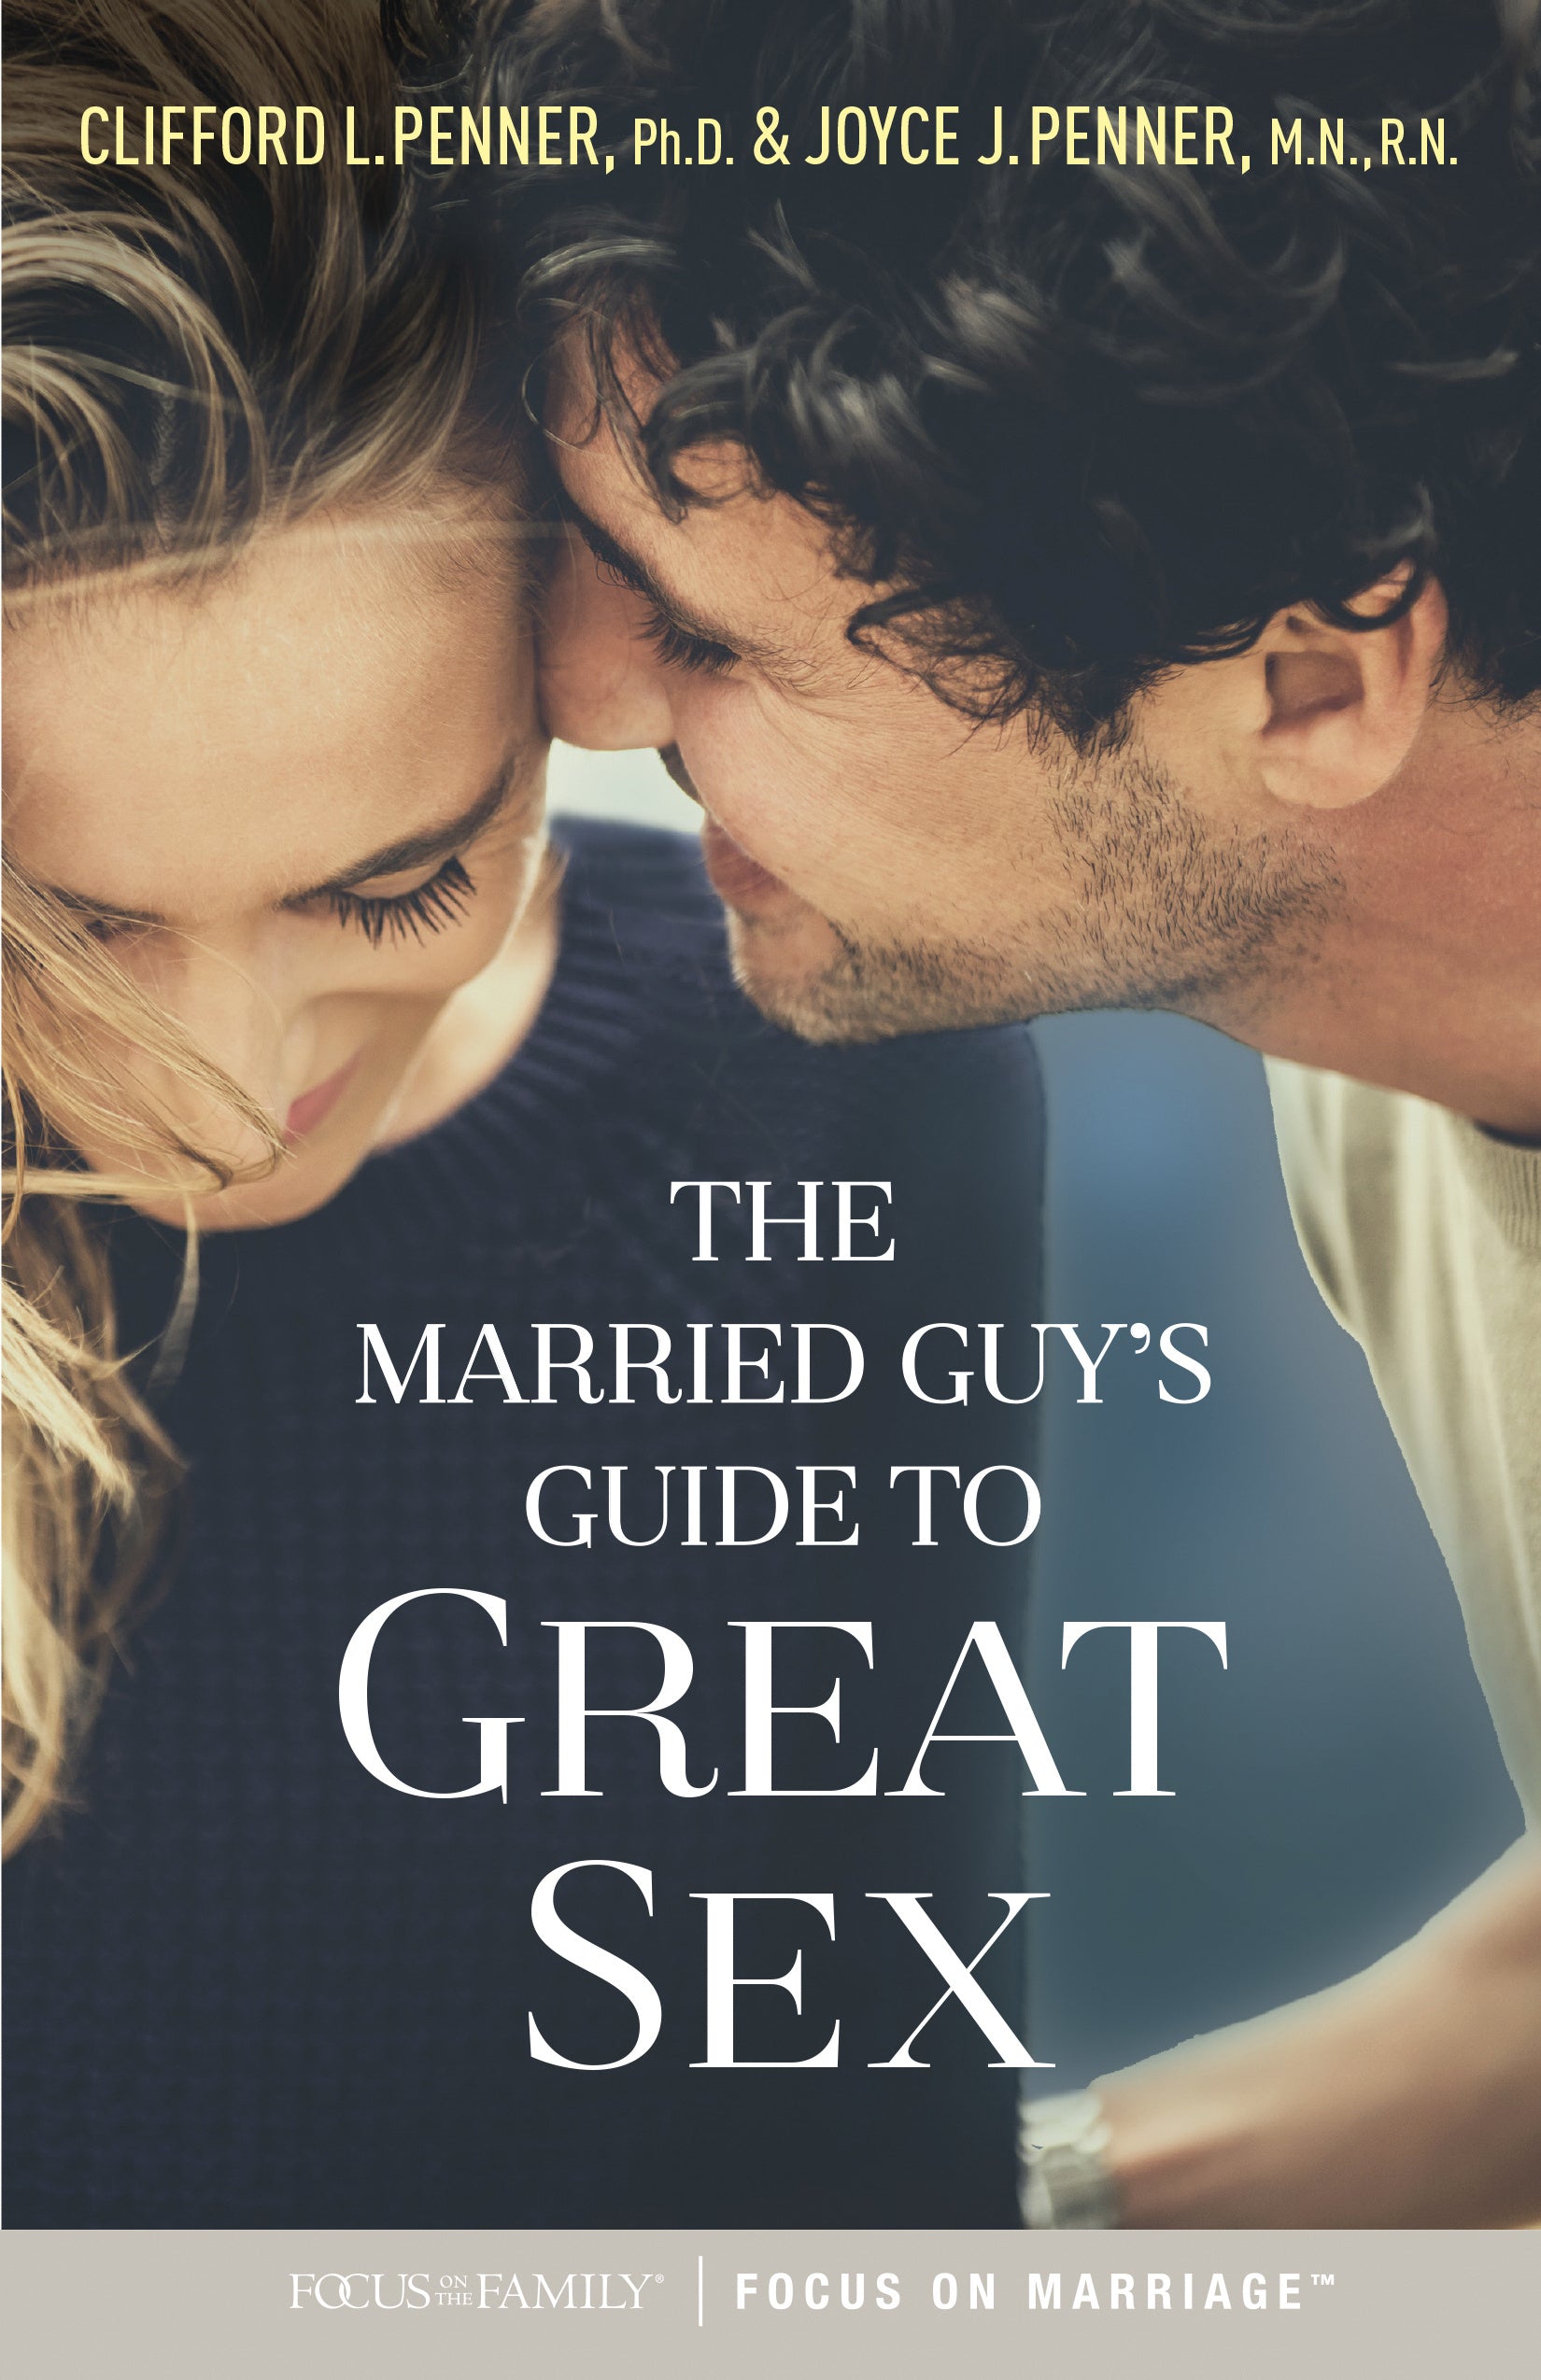 Image of The Married Guy's Guide to Great Sex other